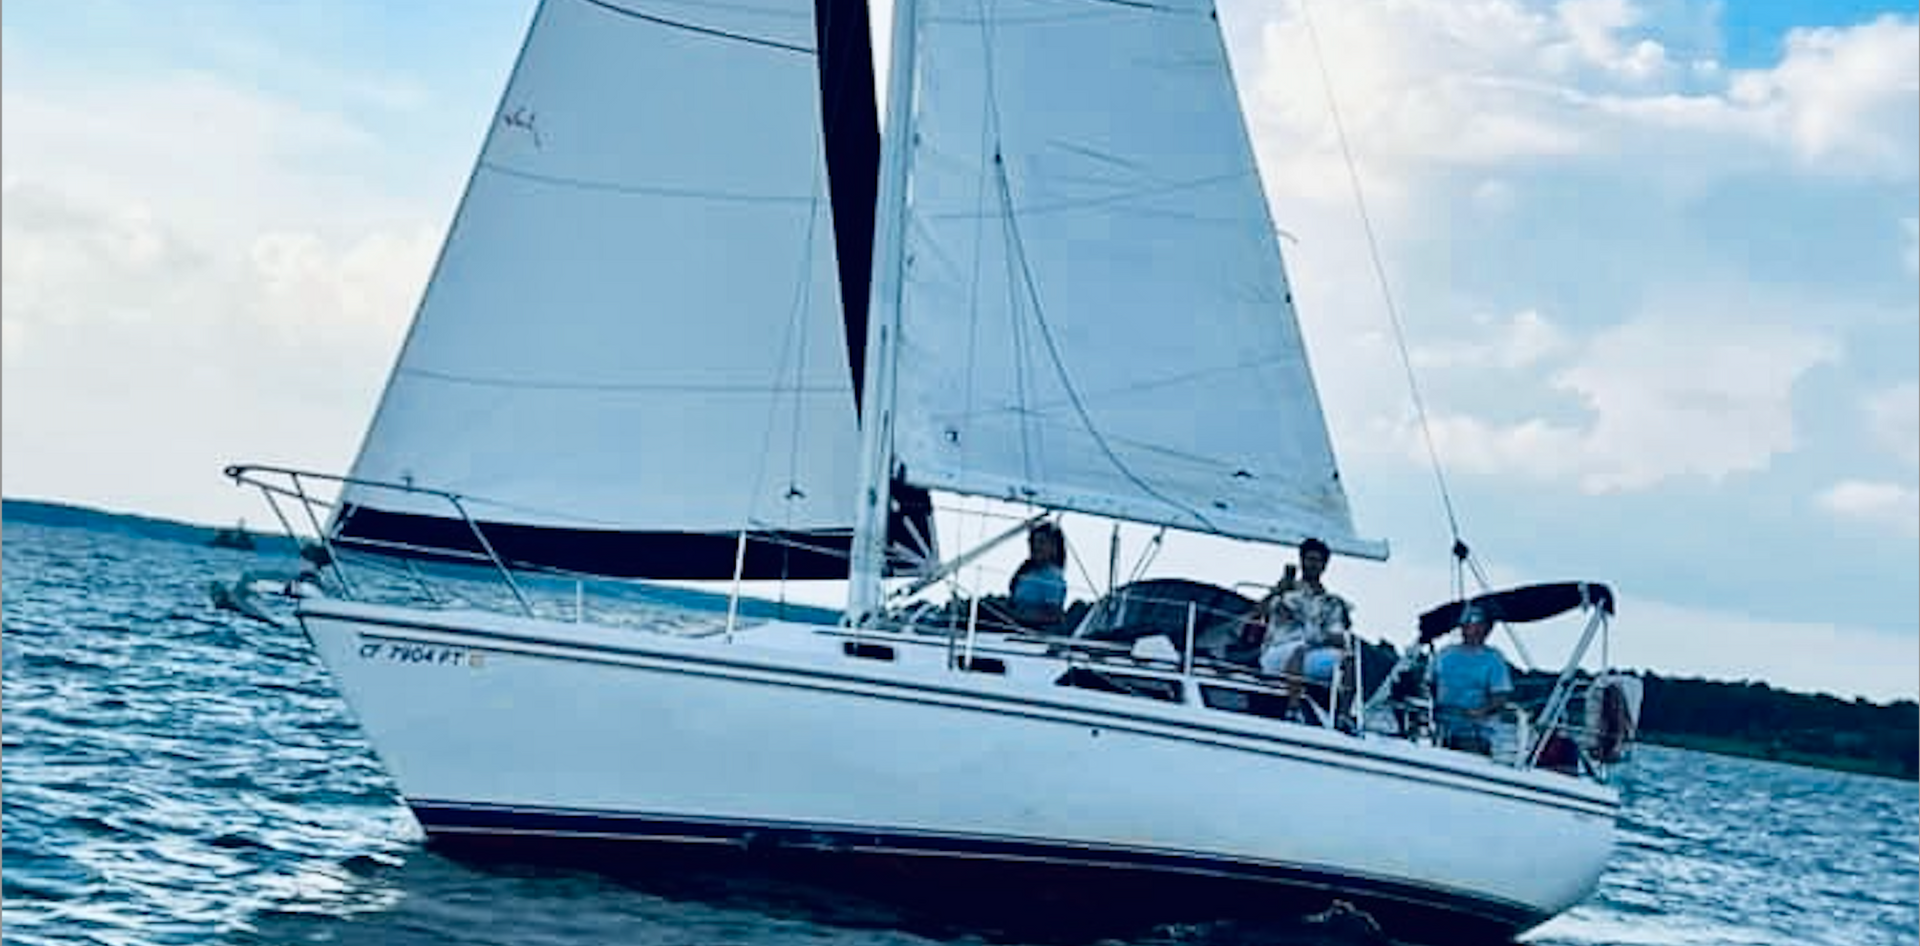 Photo of Pilot Cove Ventures Catalina 30 sailboat on a Lake Murray boat tour and sailing charter. 